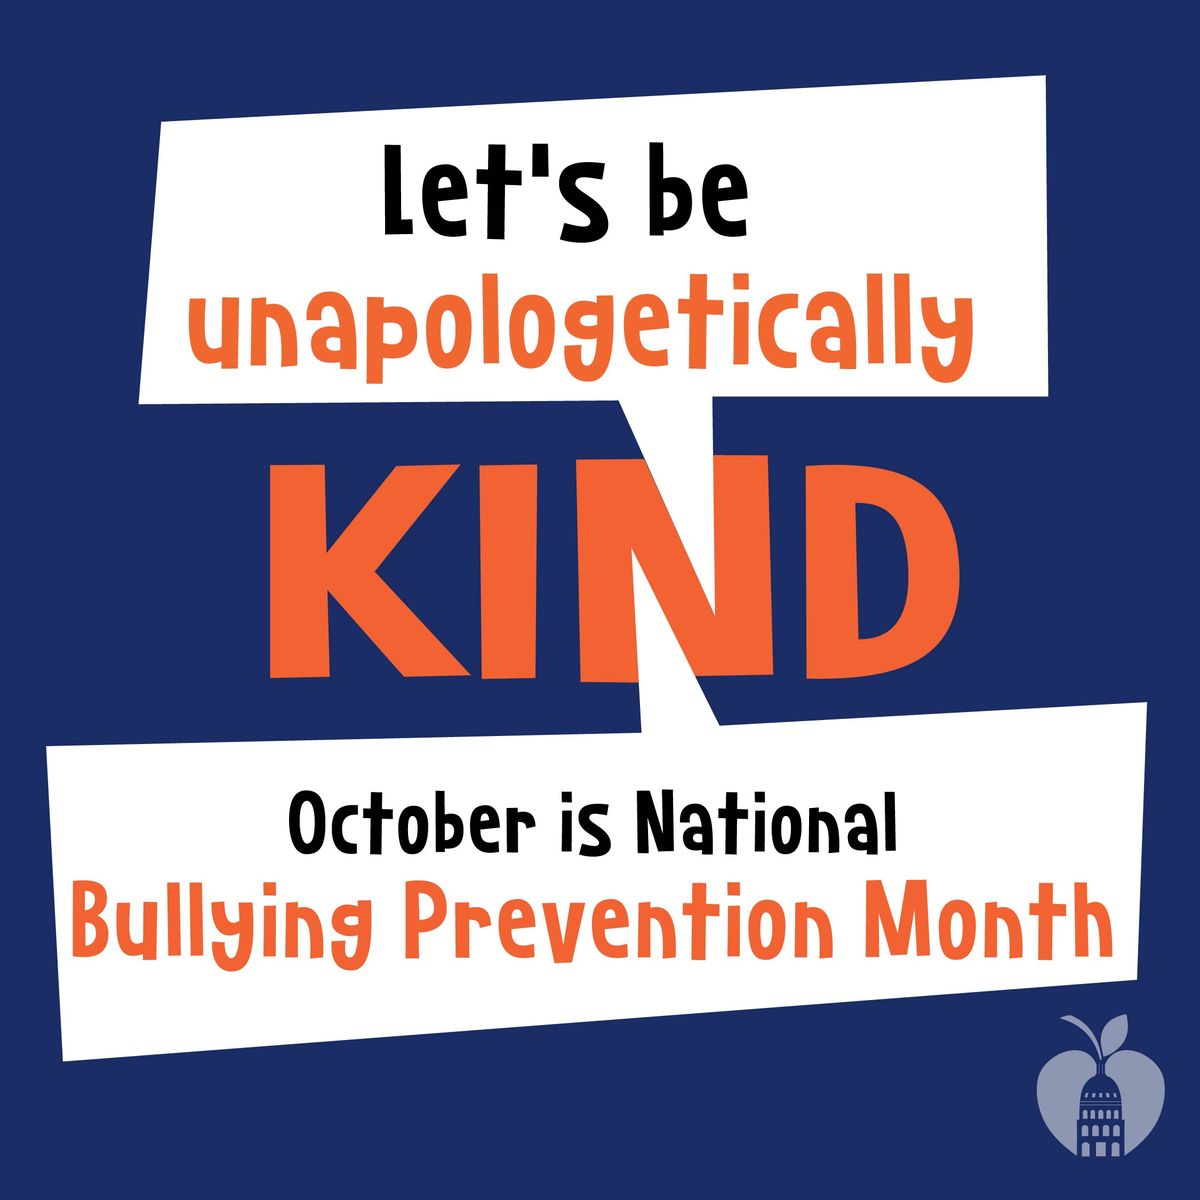 Let's be unapologetically kind. October is National Bullying Prevention Month